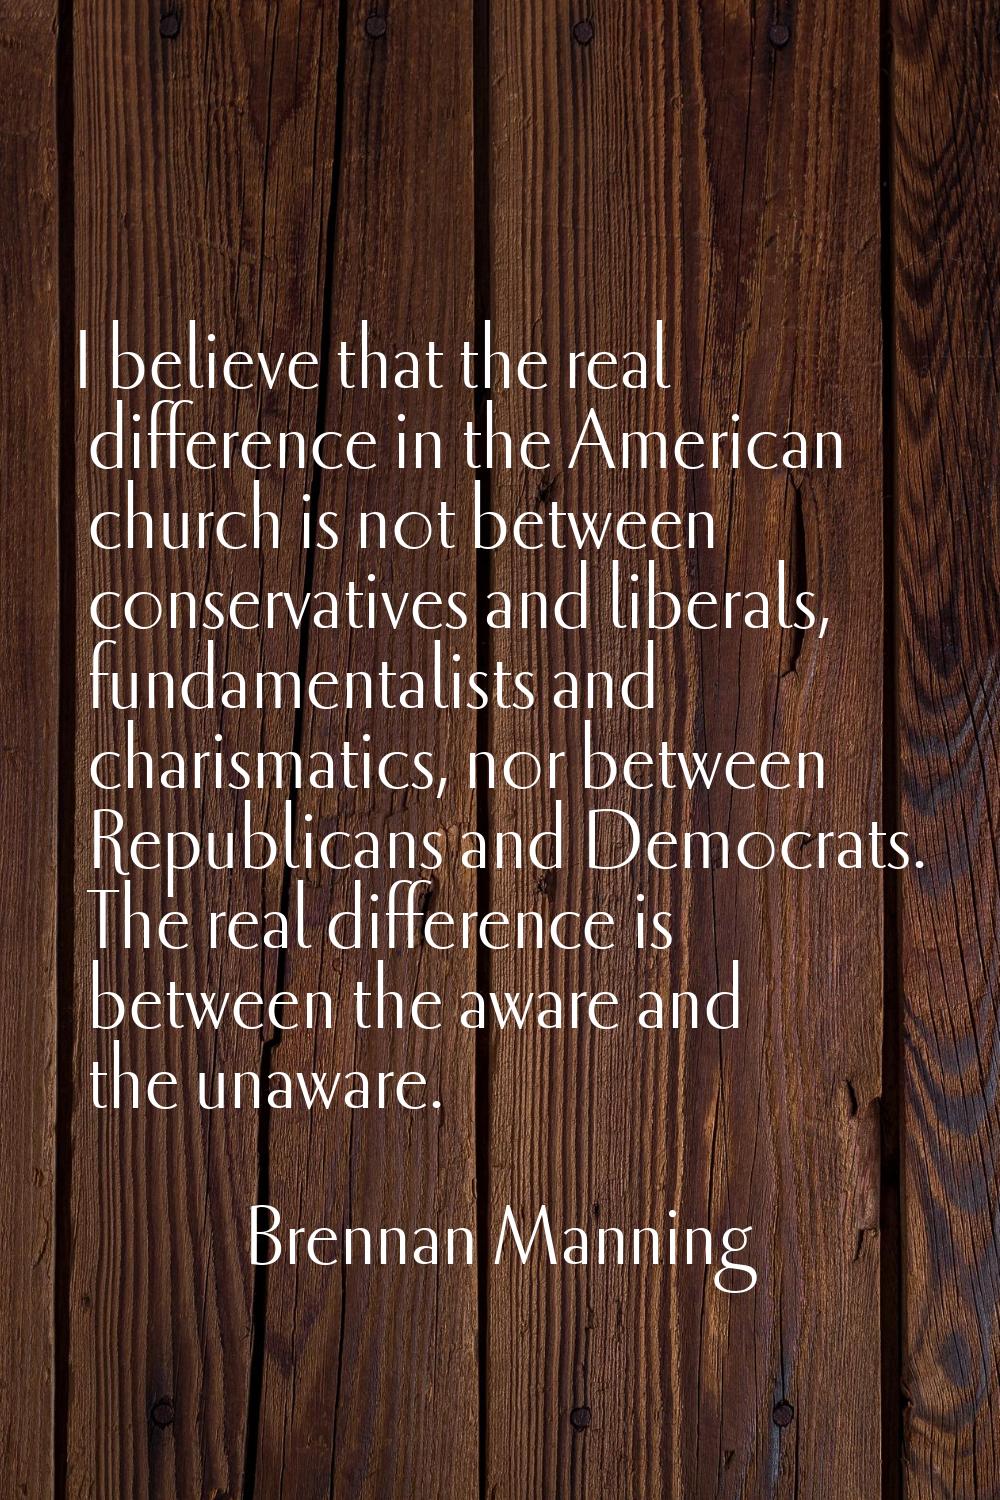 I believe that the real difference in the American church is not between conservatives and liberals